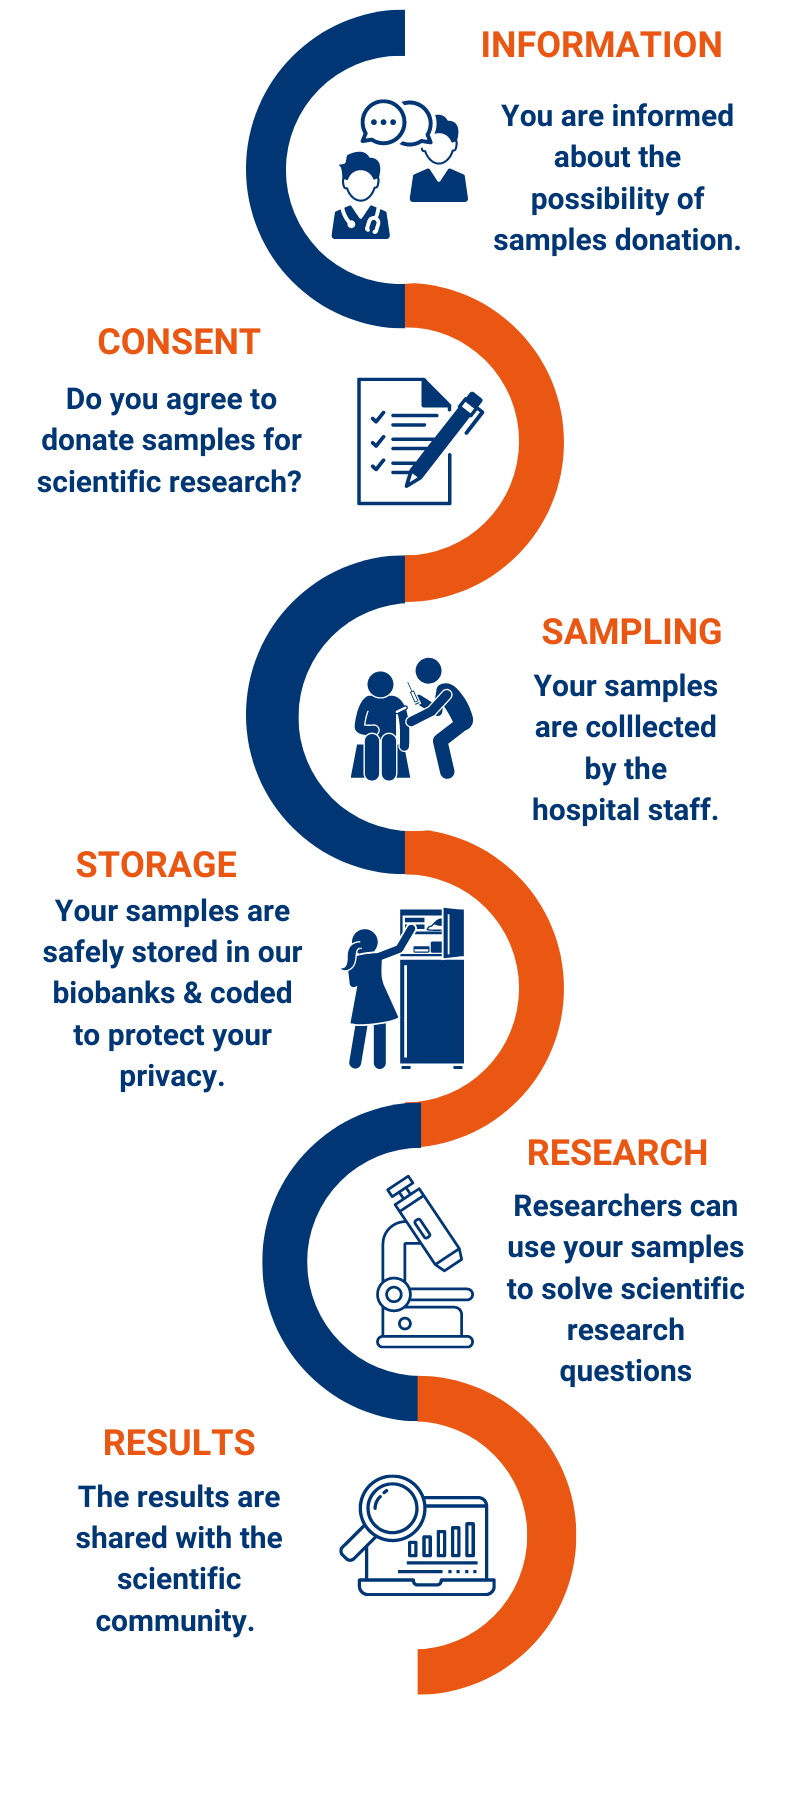 Sample flow of samples: Information - Consent - Sampling - Storage -Research -Results